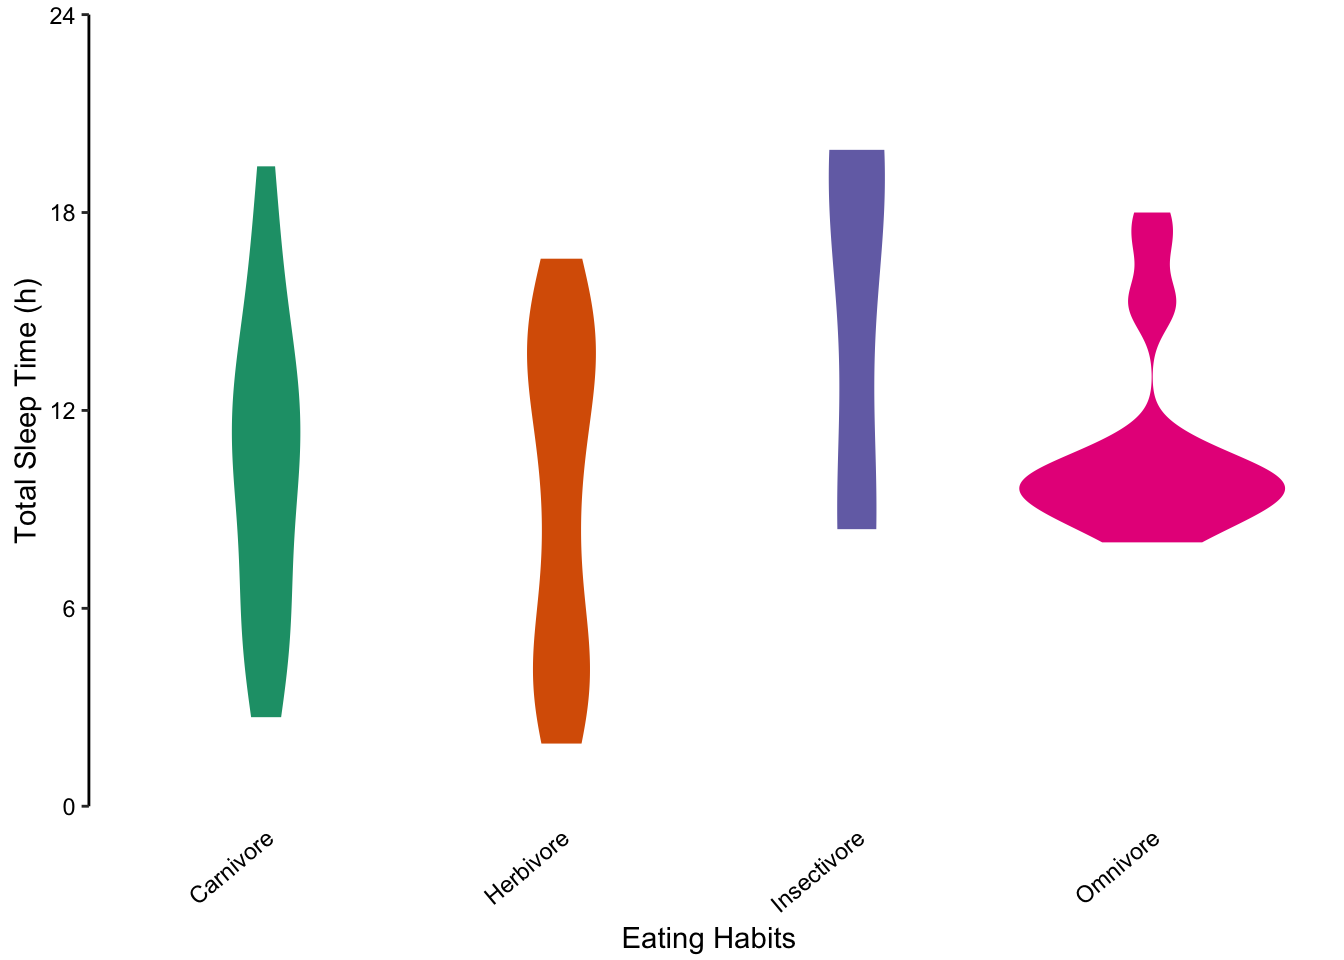 violin plots offer another alternative to bar charts for showing unusual distributions.